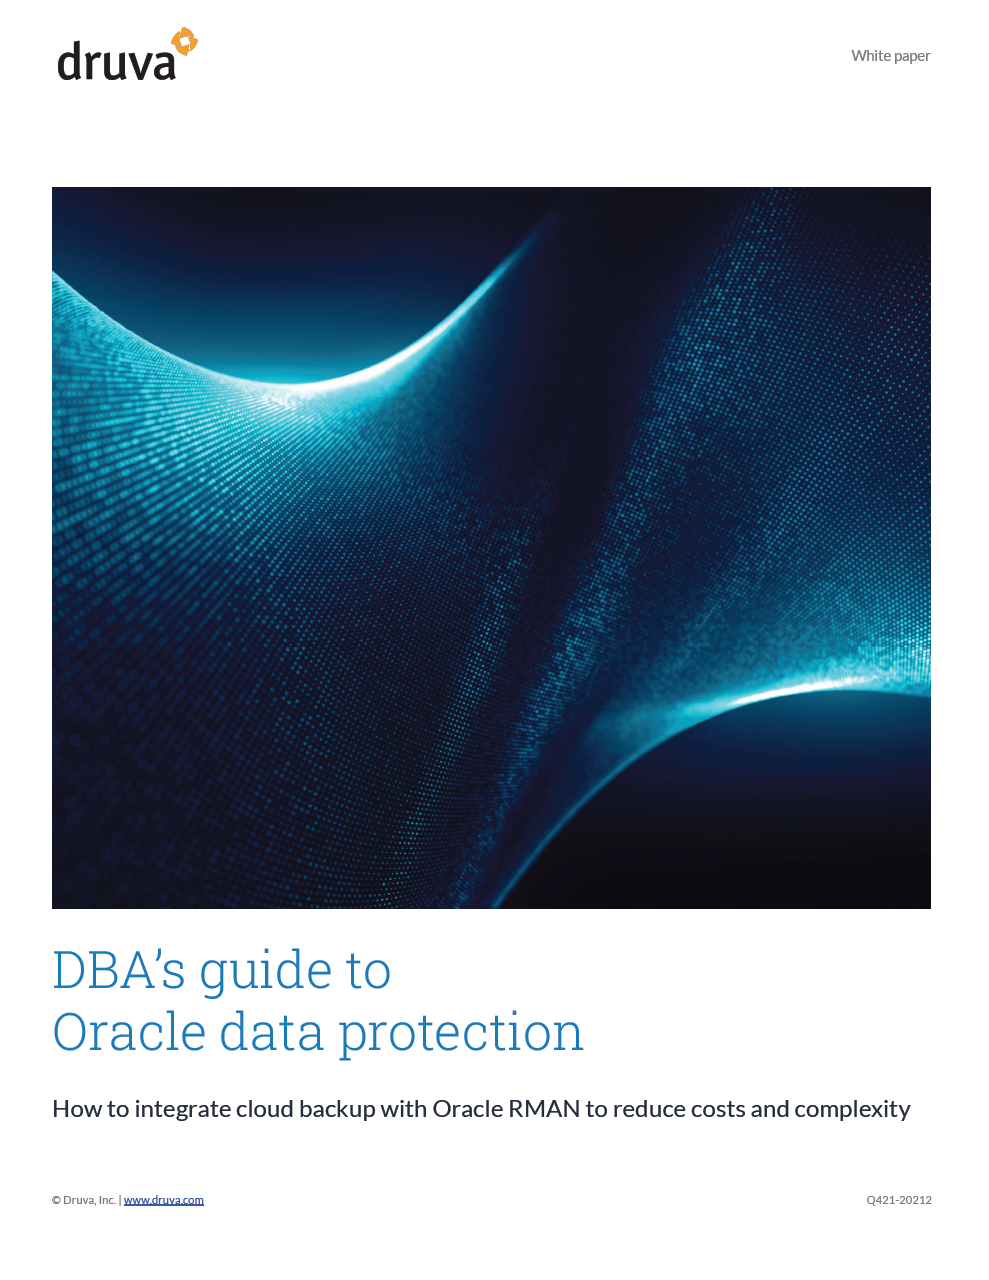 DBA's guide to oracle data protection